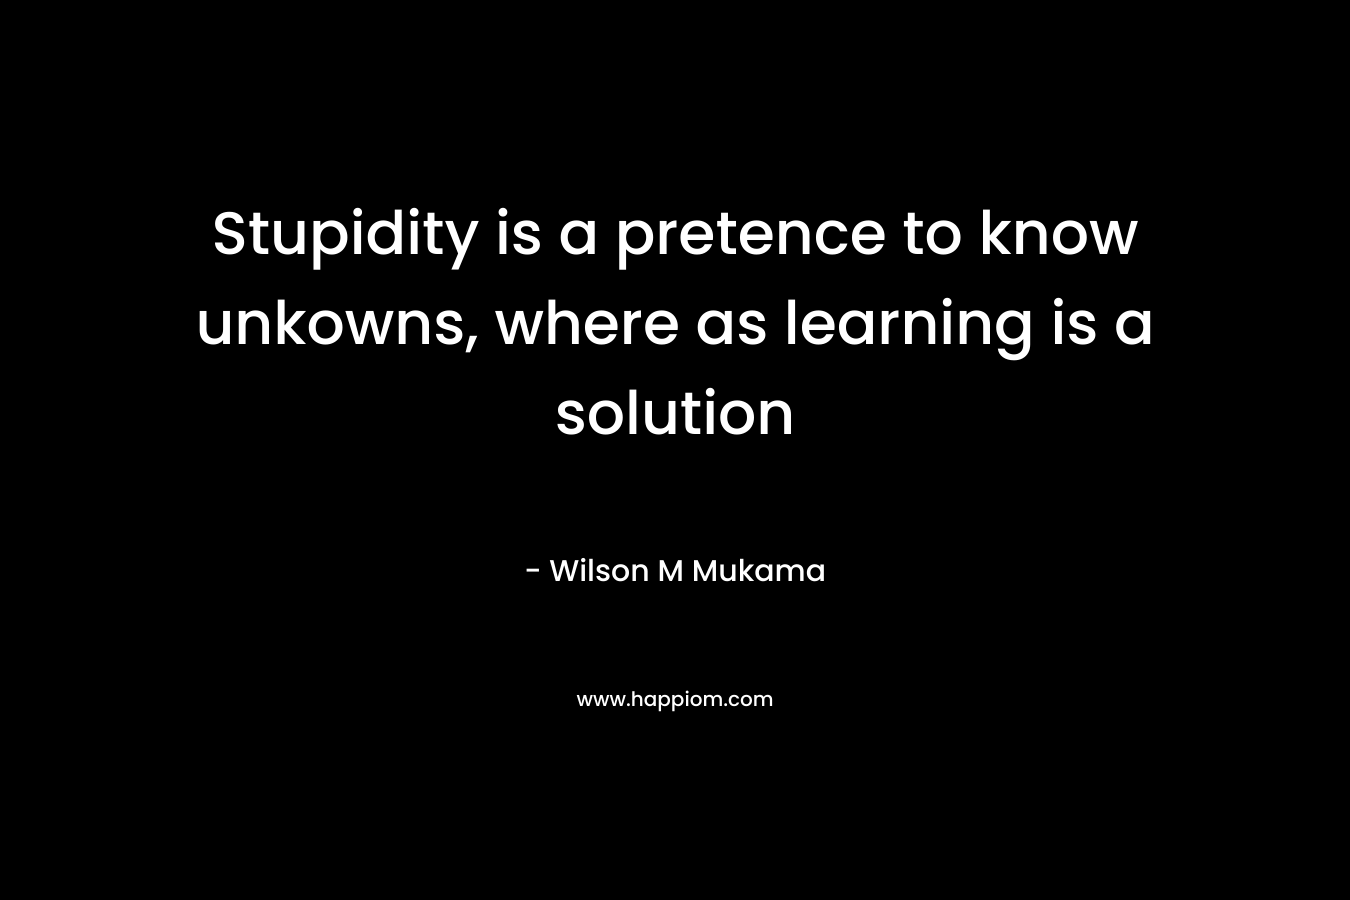 Stupidity is a pretence to know unkowns, where as learning is a solution – Wilson M Mukama